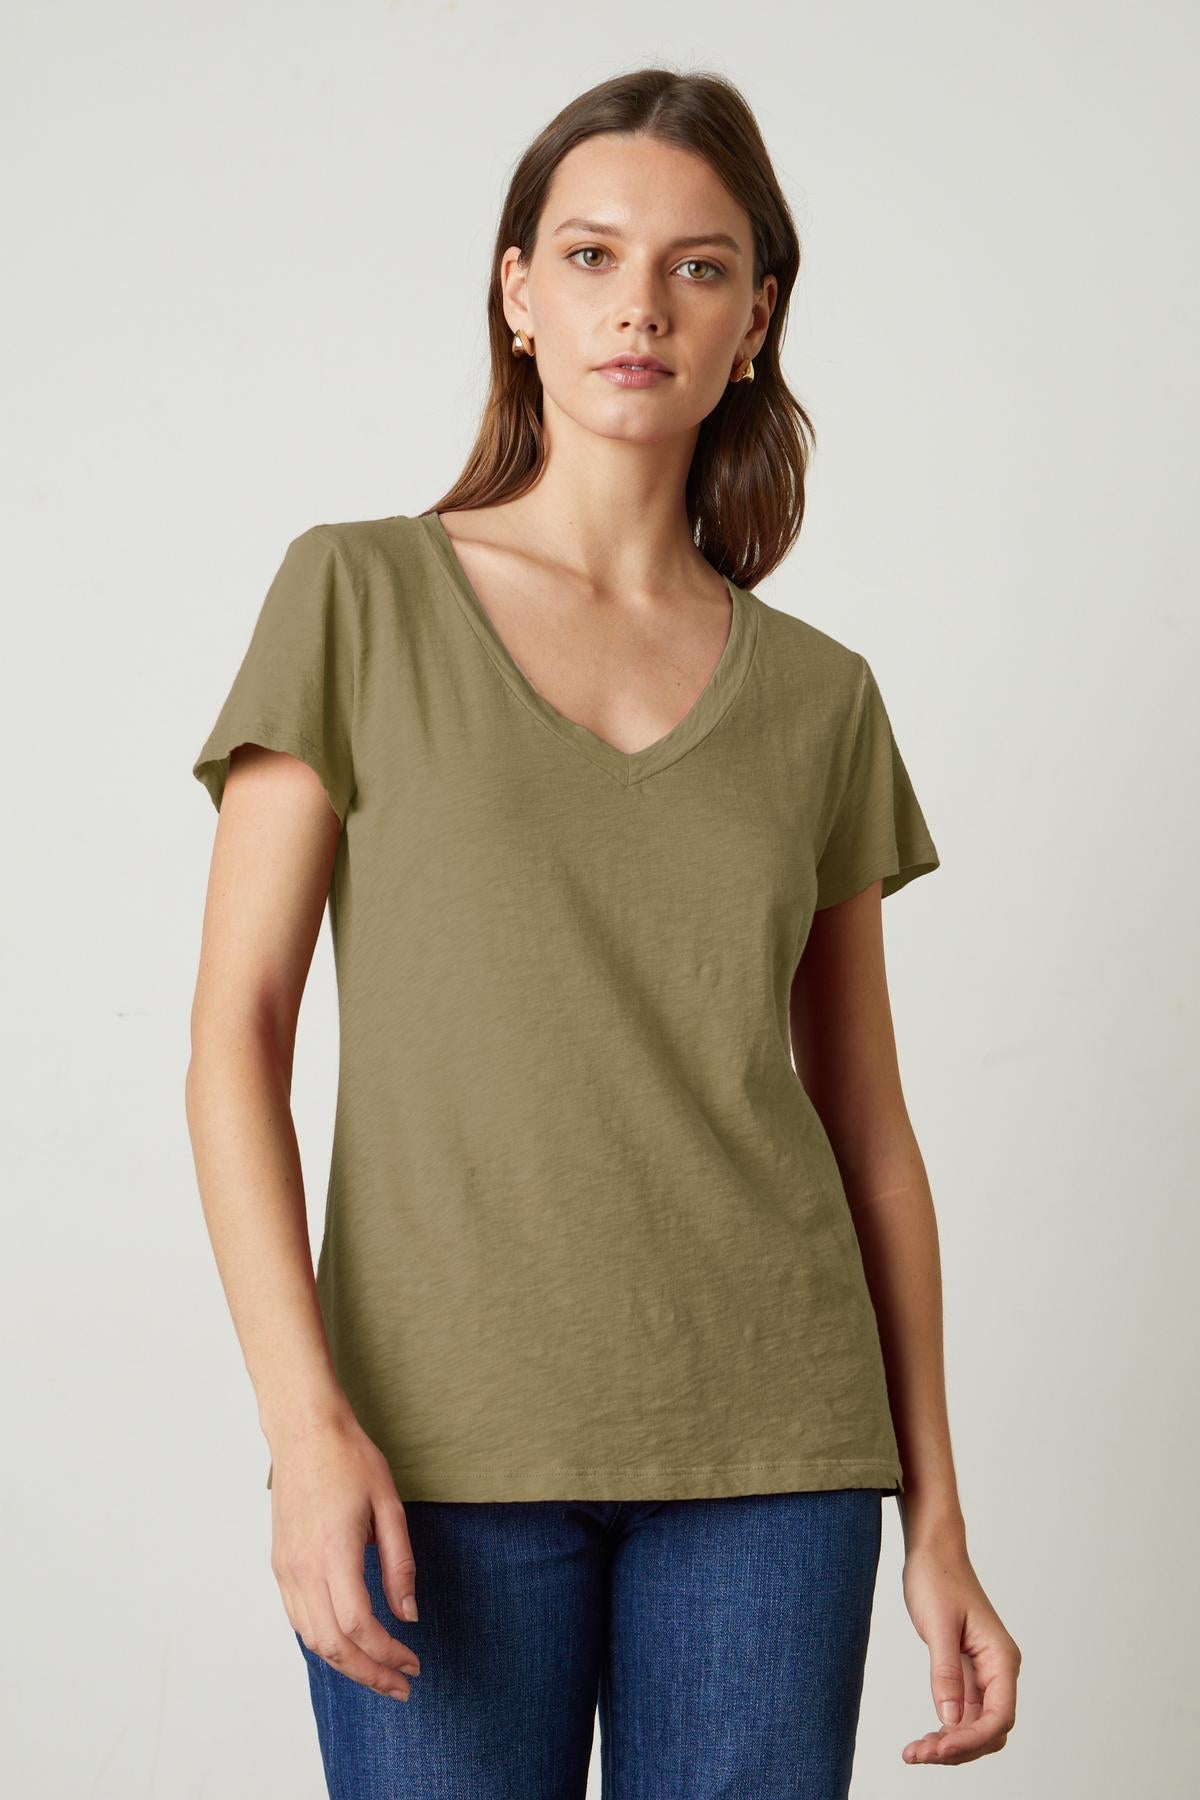 A woman with a preppy tomboy style wearing a Velvet by Graham & Spencer LILITH COTTON SLUB V-NECK TEE in green.-35782982369473